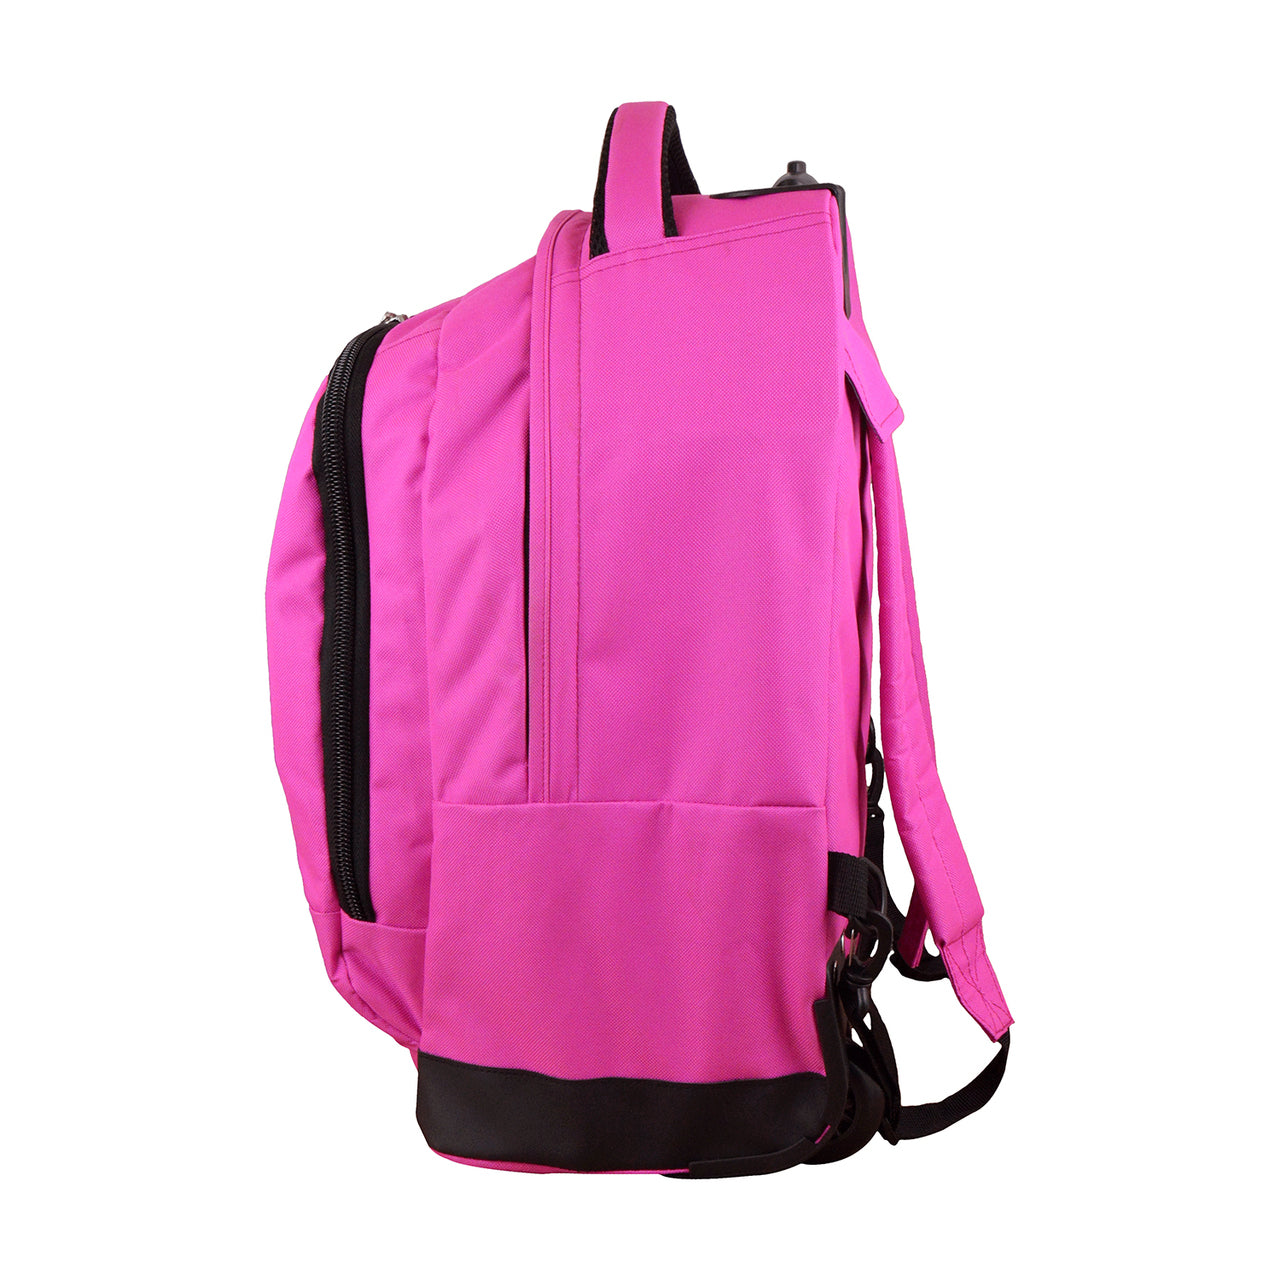 Houston Rockets Premium Wheeled Backpack in Pink